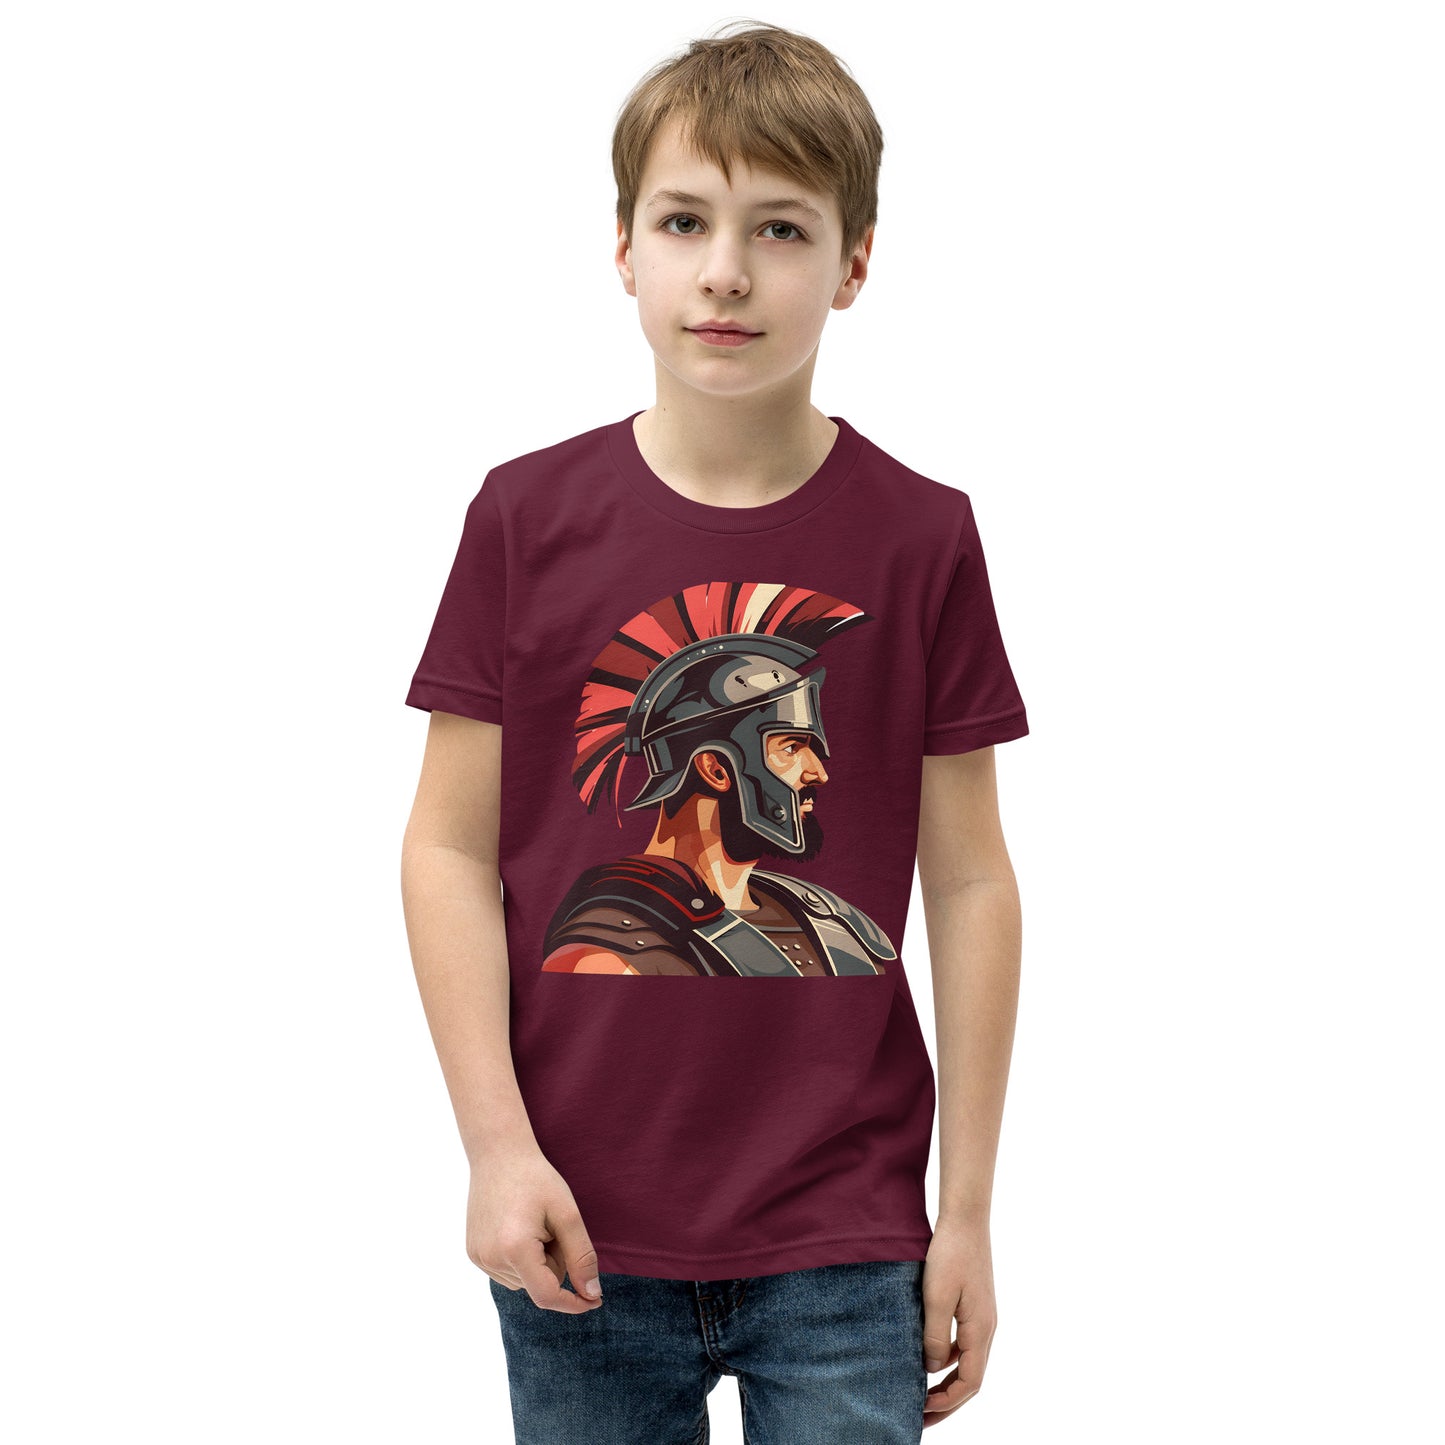 Teenager with a maroon T-shirt with a print of a warrior